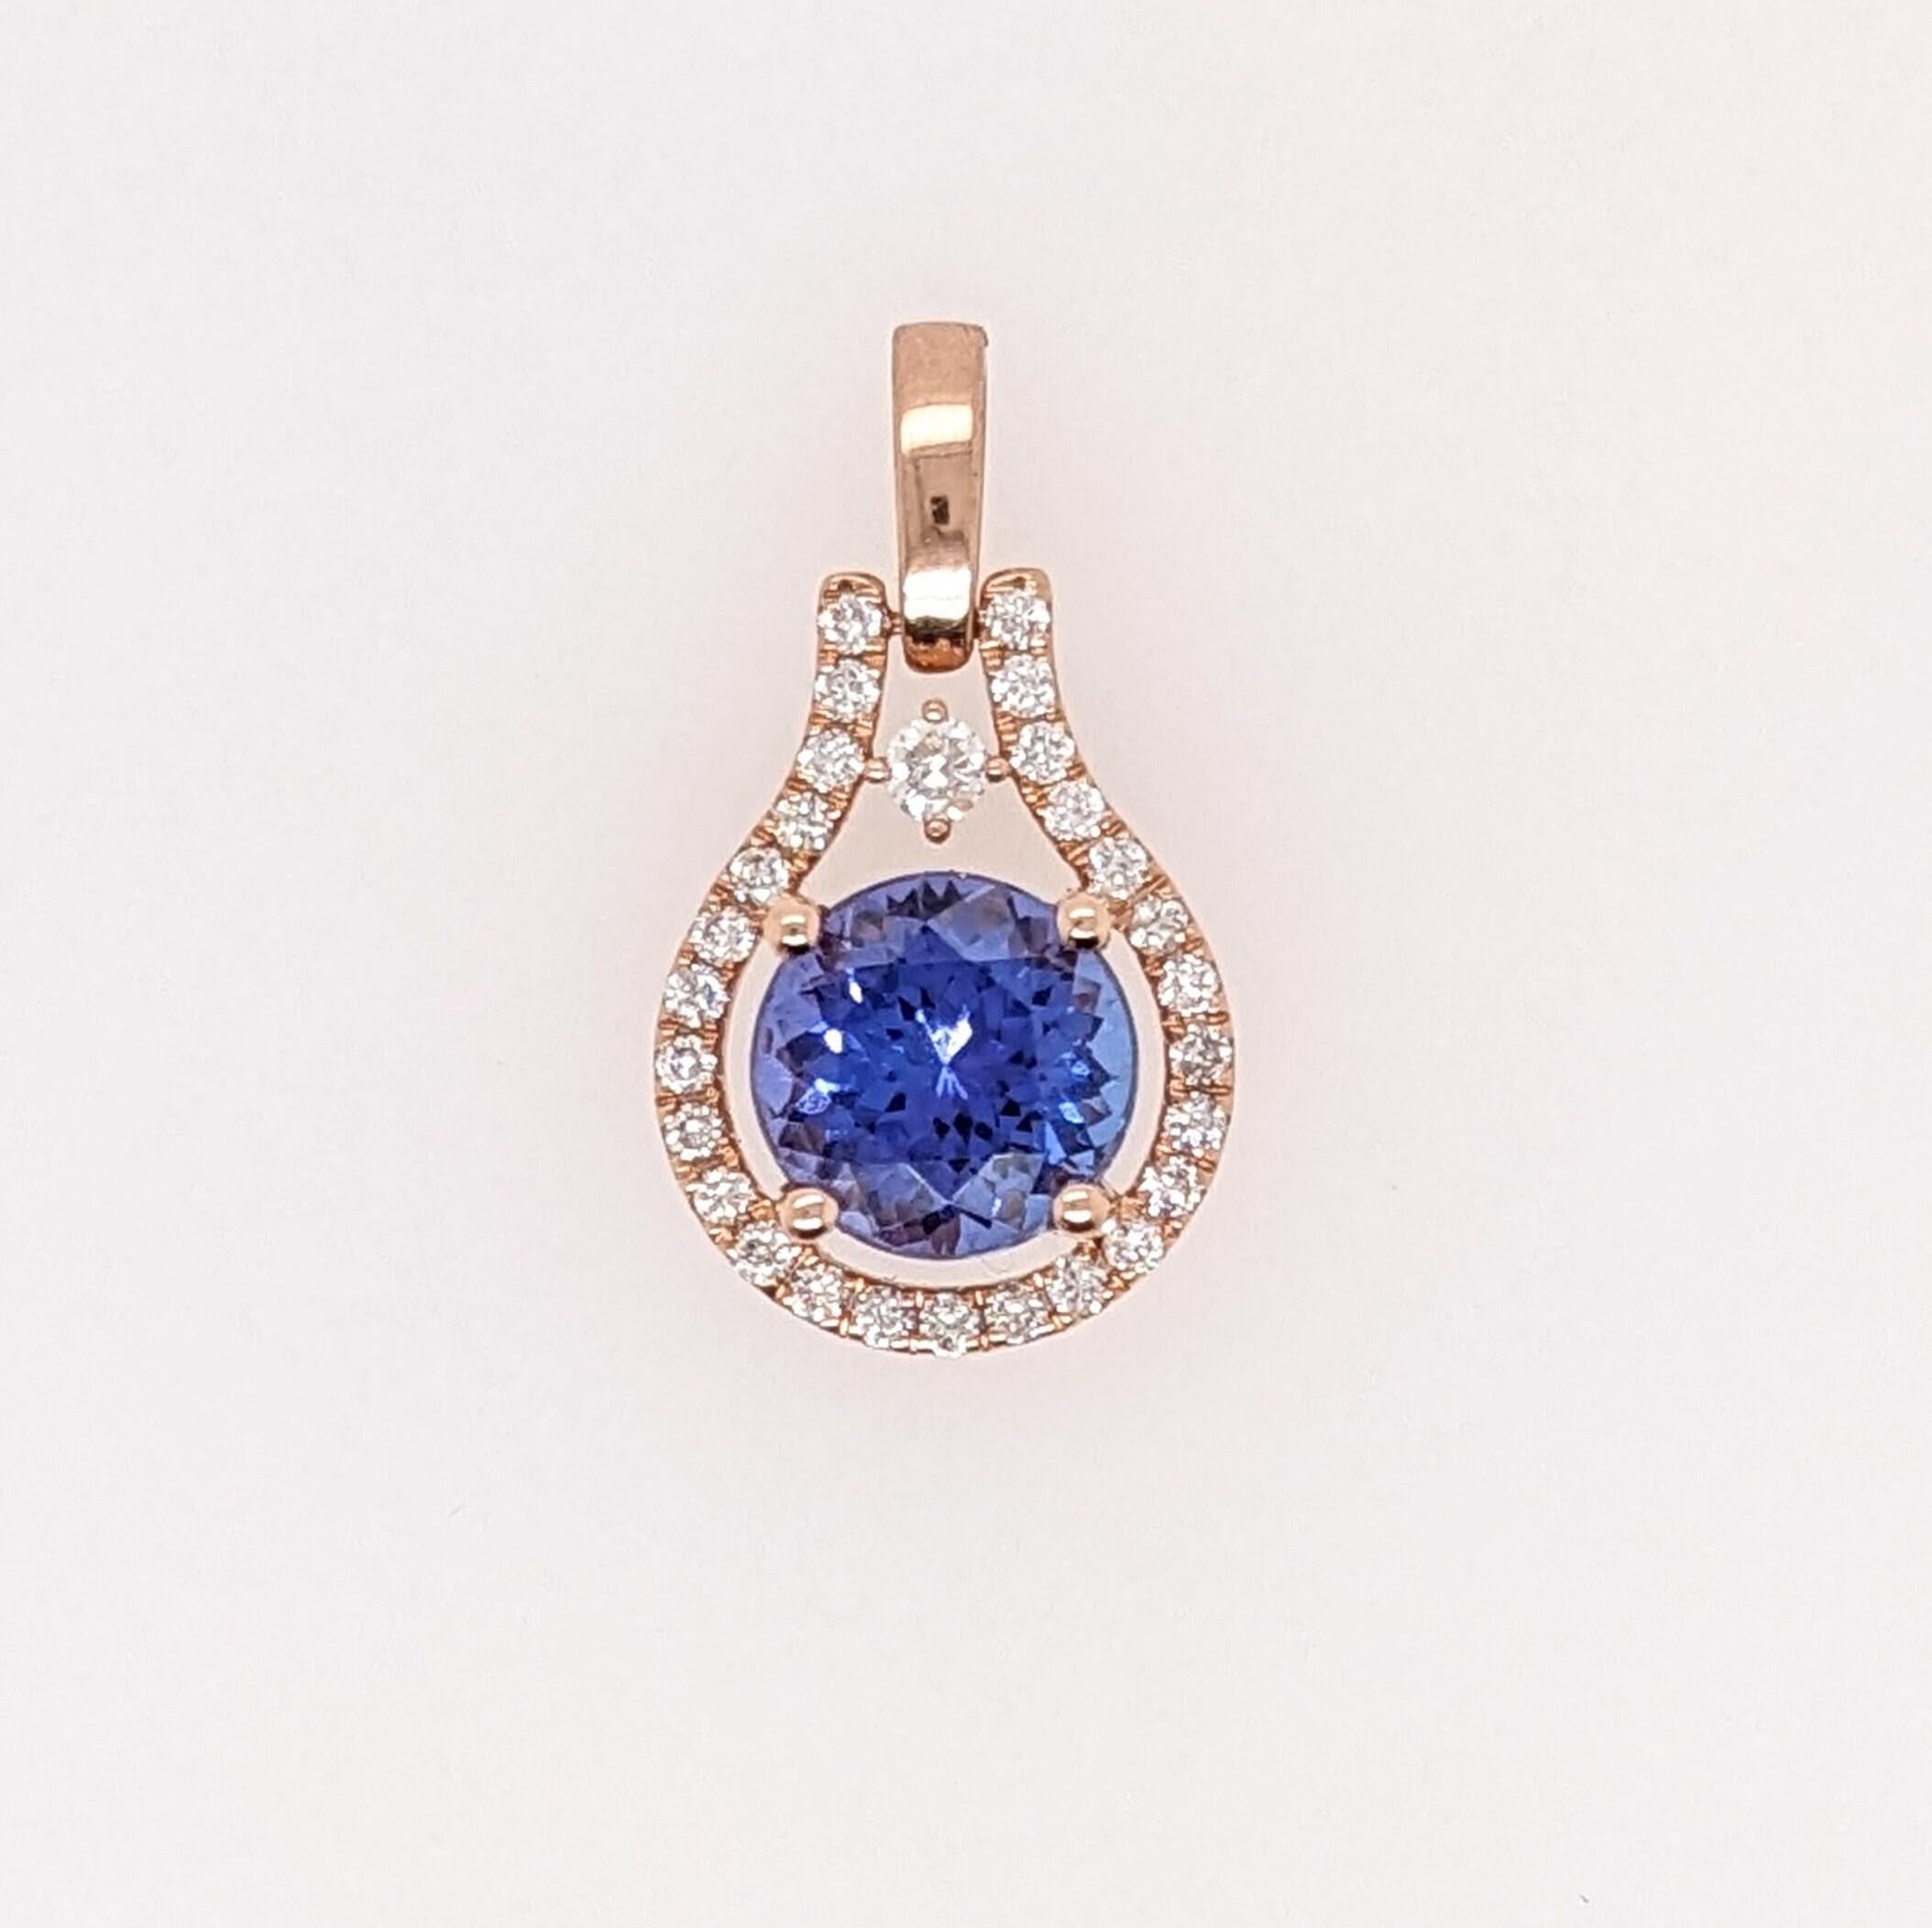 This beautiful pendant features a round 1.65 carat tanzanite with earth mined diamonds all set in solid 14K gold. This pendant also makes a great december birthstone gift for your loved ones!

Specifications

Item Type: Pendant
Center Stone: